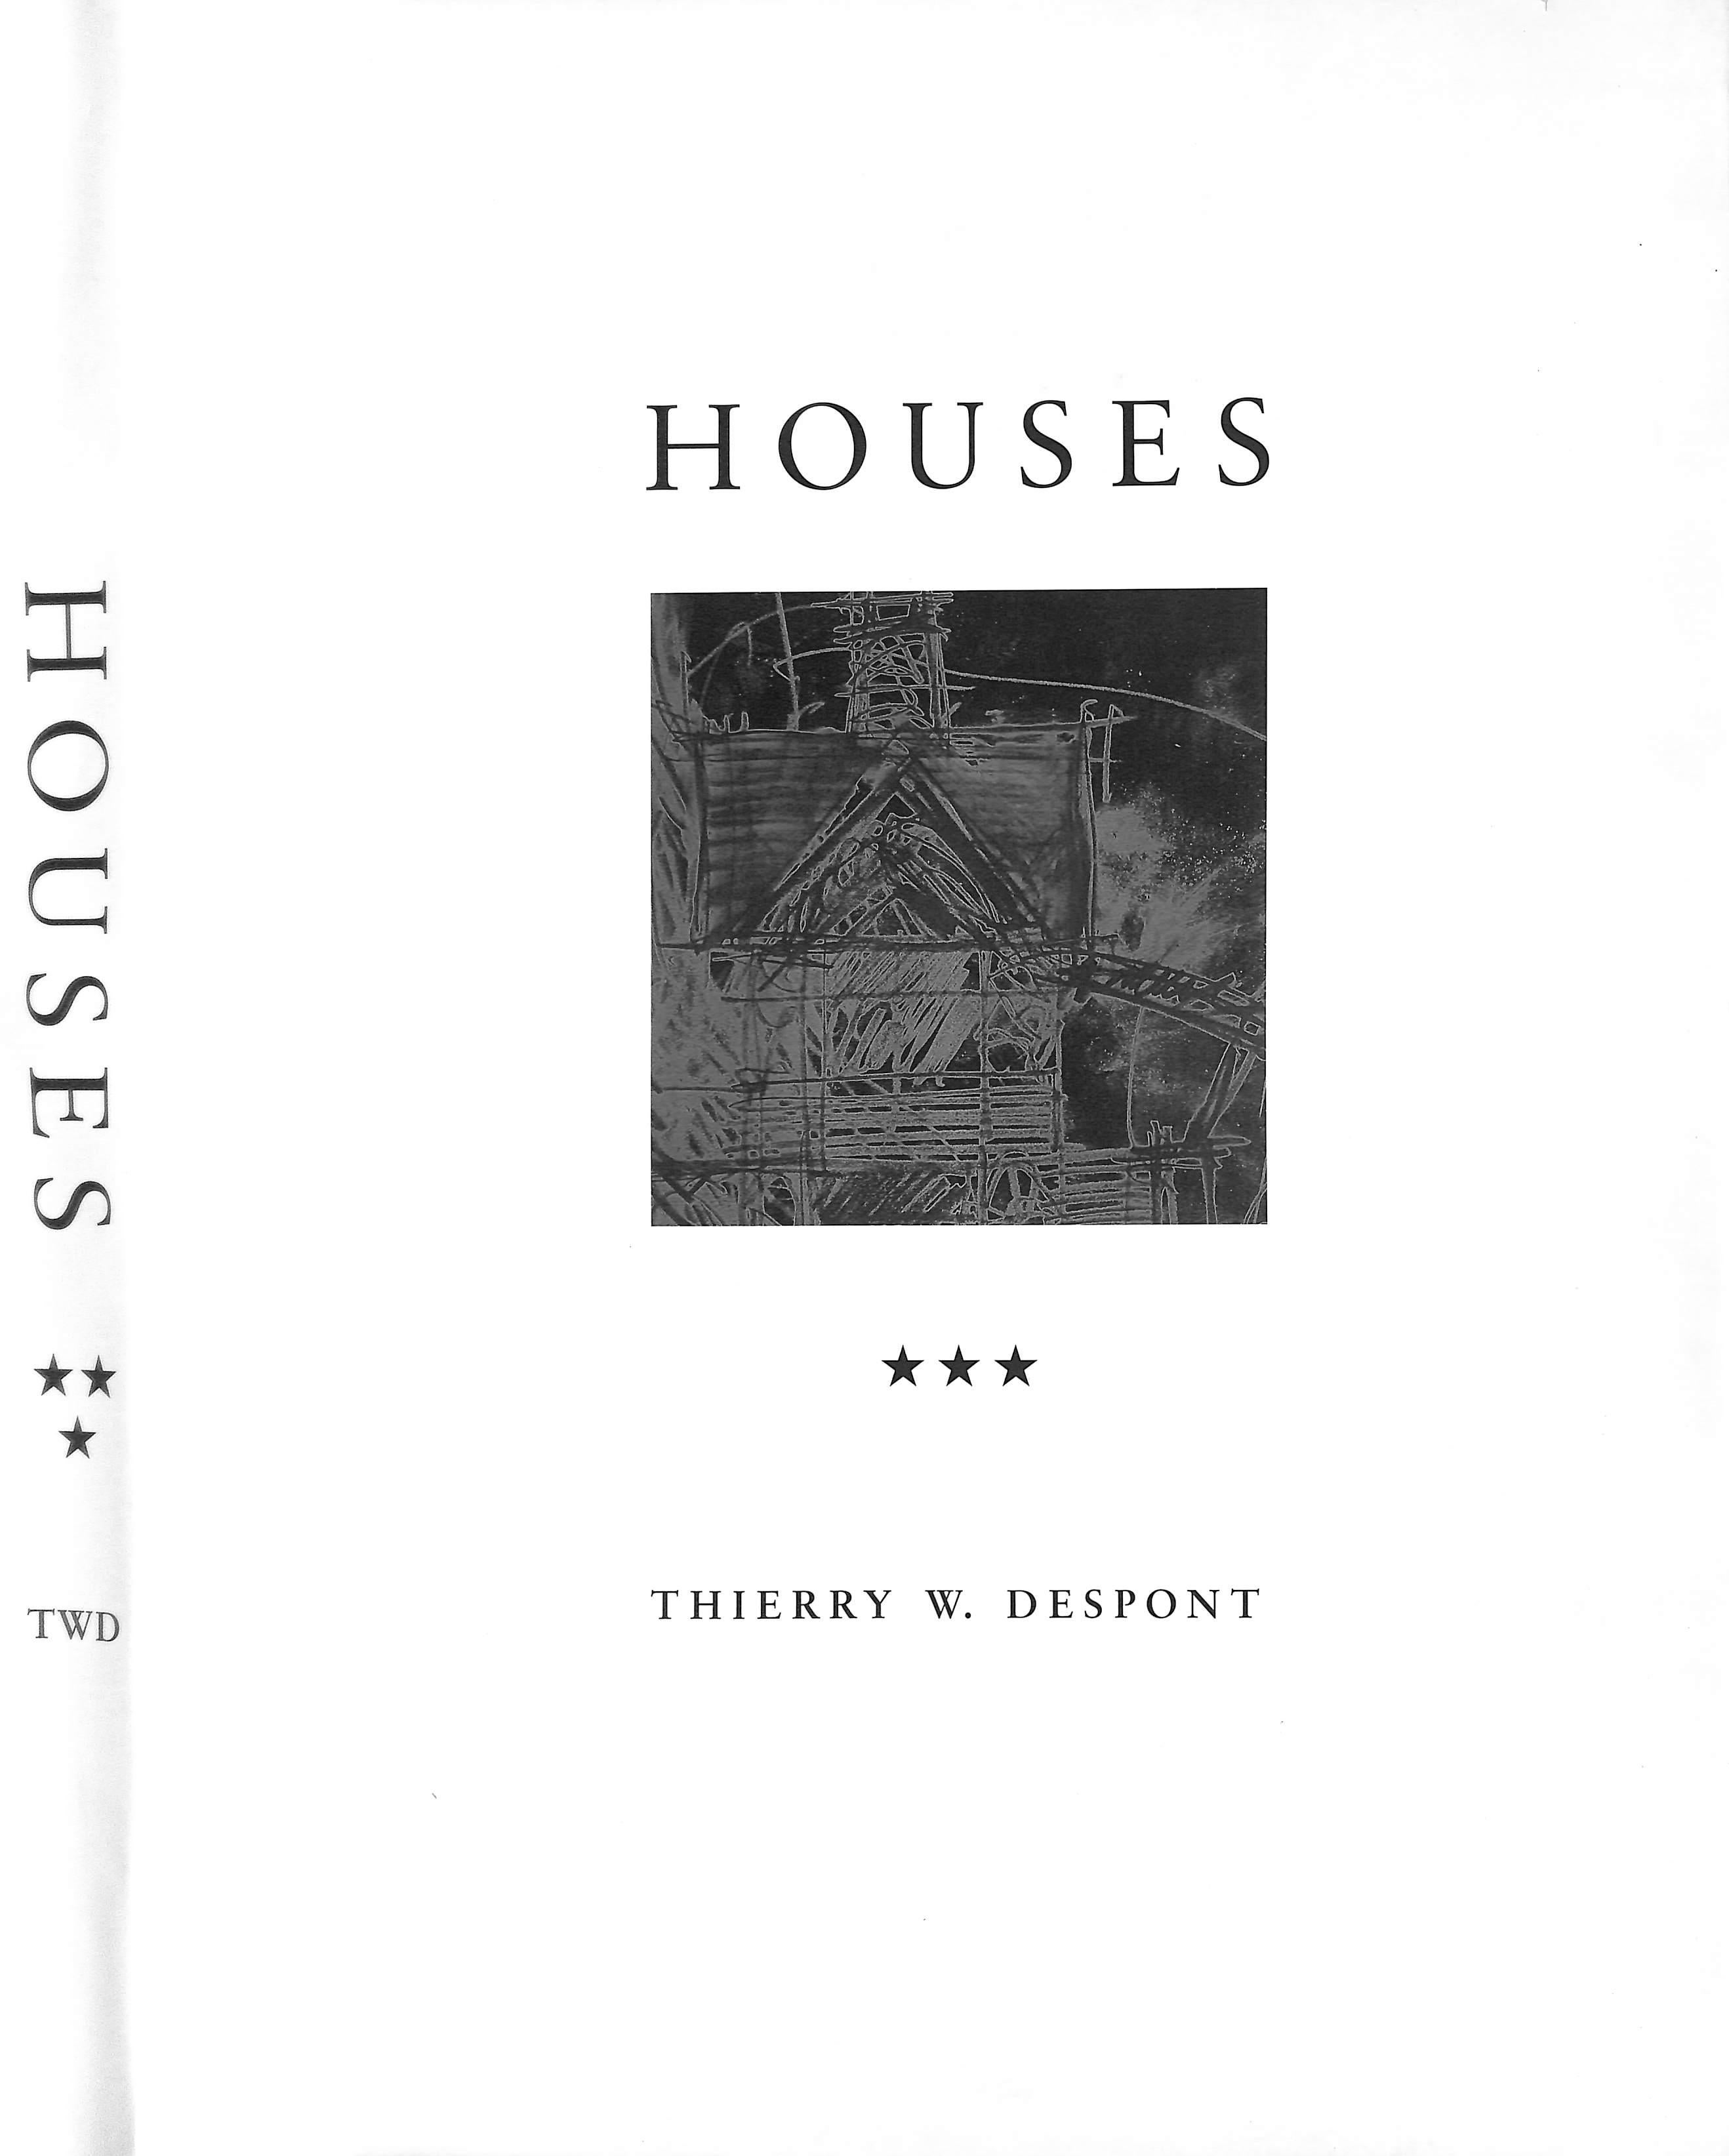 DESPONT, Thierry W.

Marquand Books, Inc.

2000

16 1/2" x 12"

This private edition of 500 commemorates the twentieth anniversary of the offices of TWD Ltd

This third volume of 'Houses' commemorates 20 years of architectural practice devoted